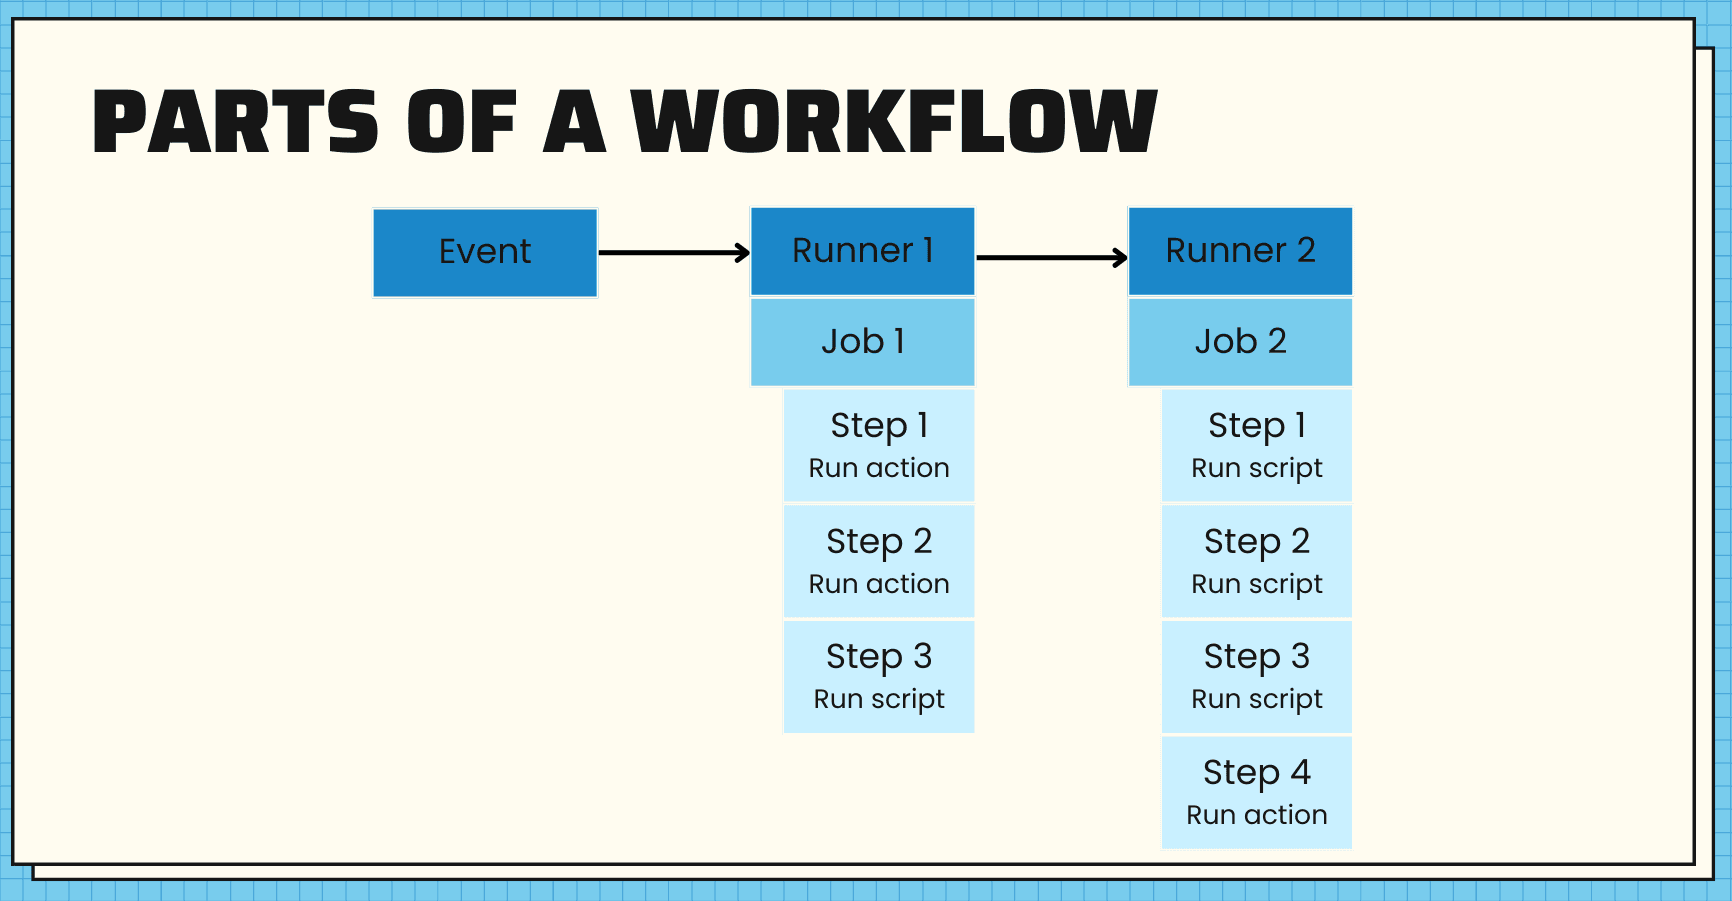 Shows parts of a GitHub workflow, where an event triggers a runner runs one job with 3 steps. Then shows a second runner running a second job and 4 steps.